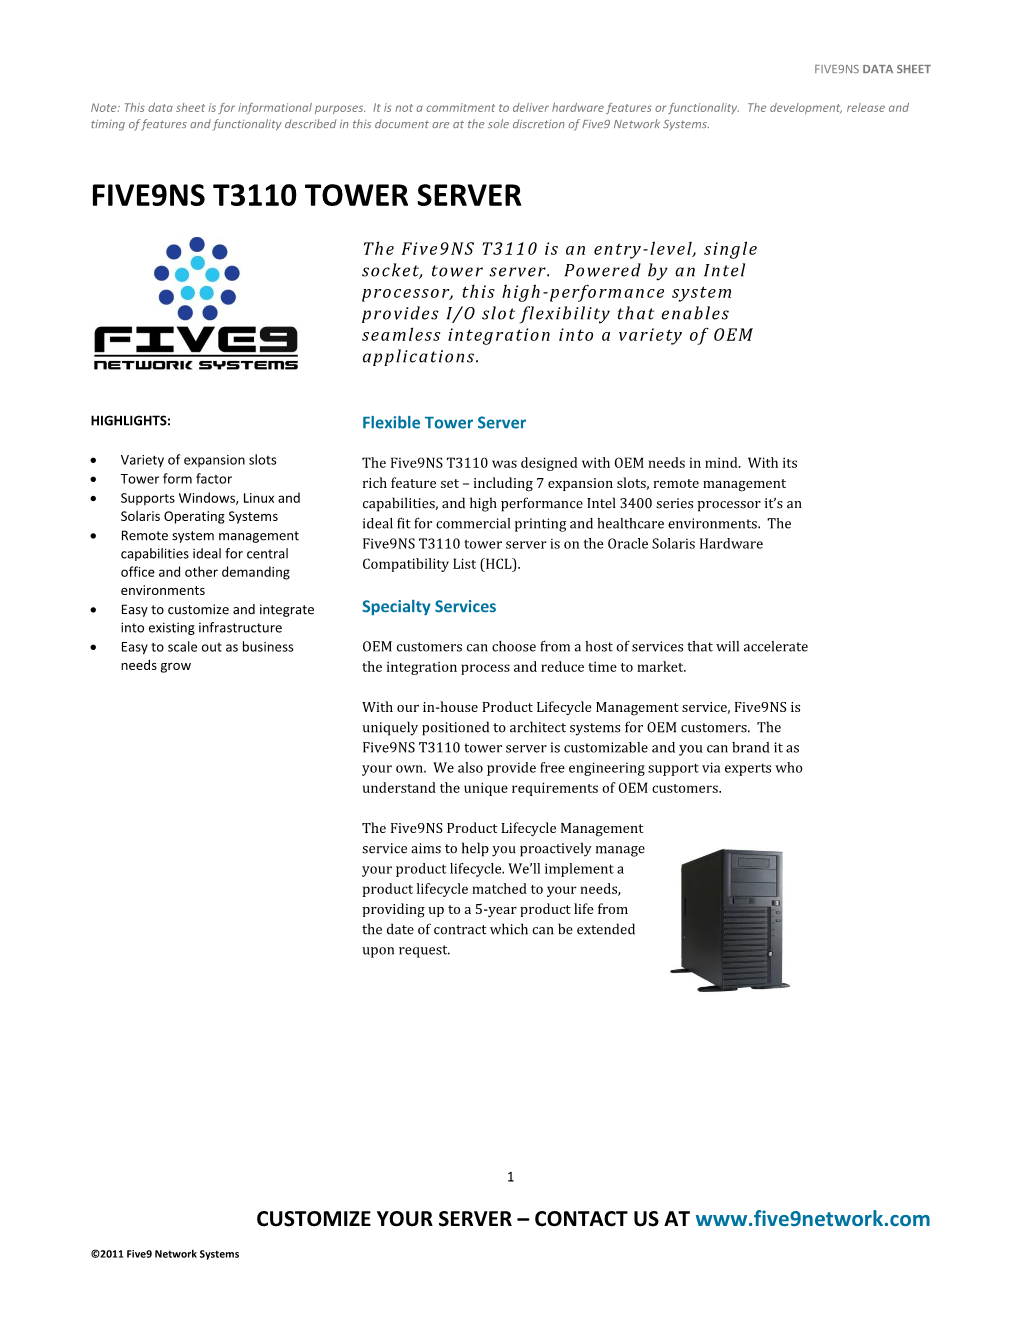 Five9ns T3110 Tower Server